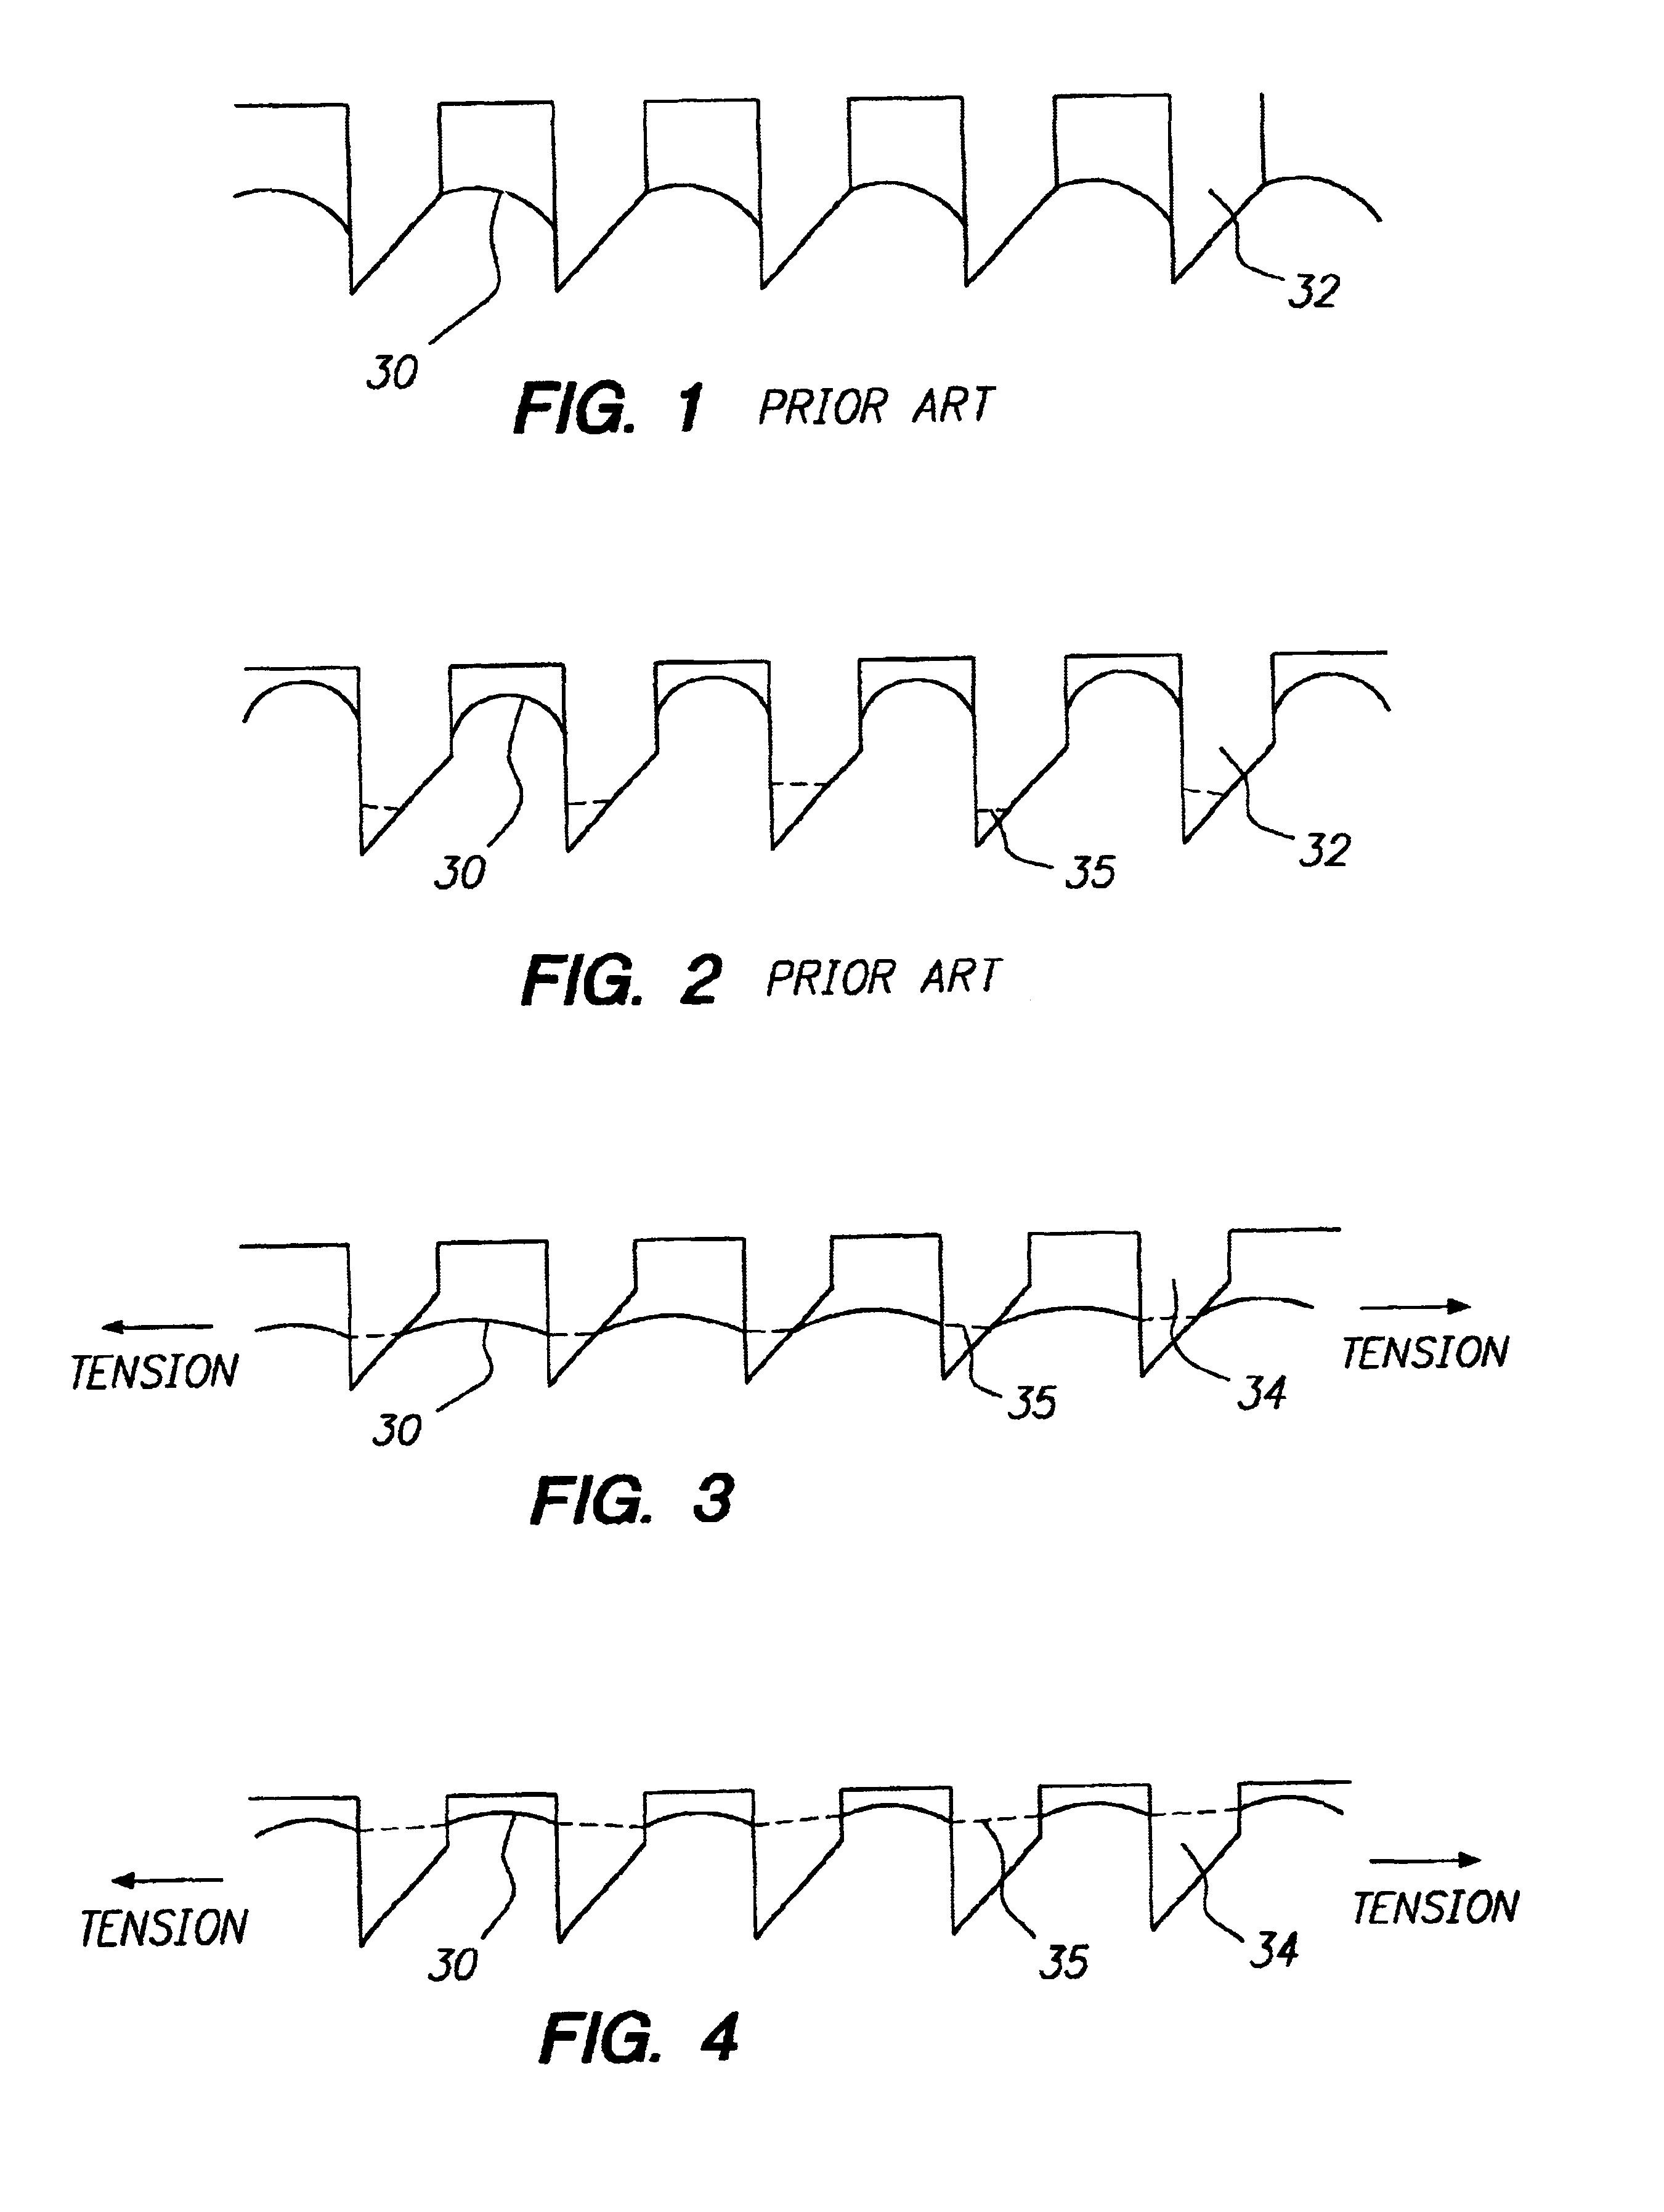 Device and method for enhancing skin piercing by microprotrusions